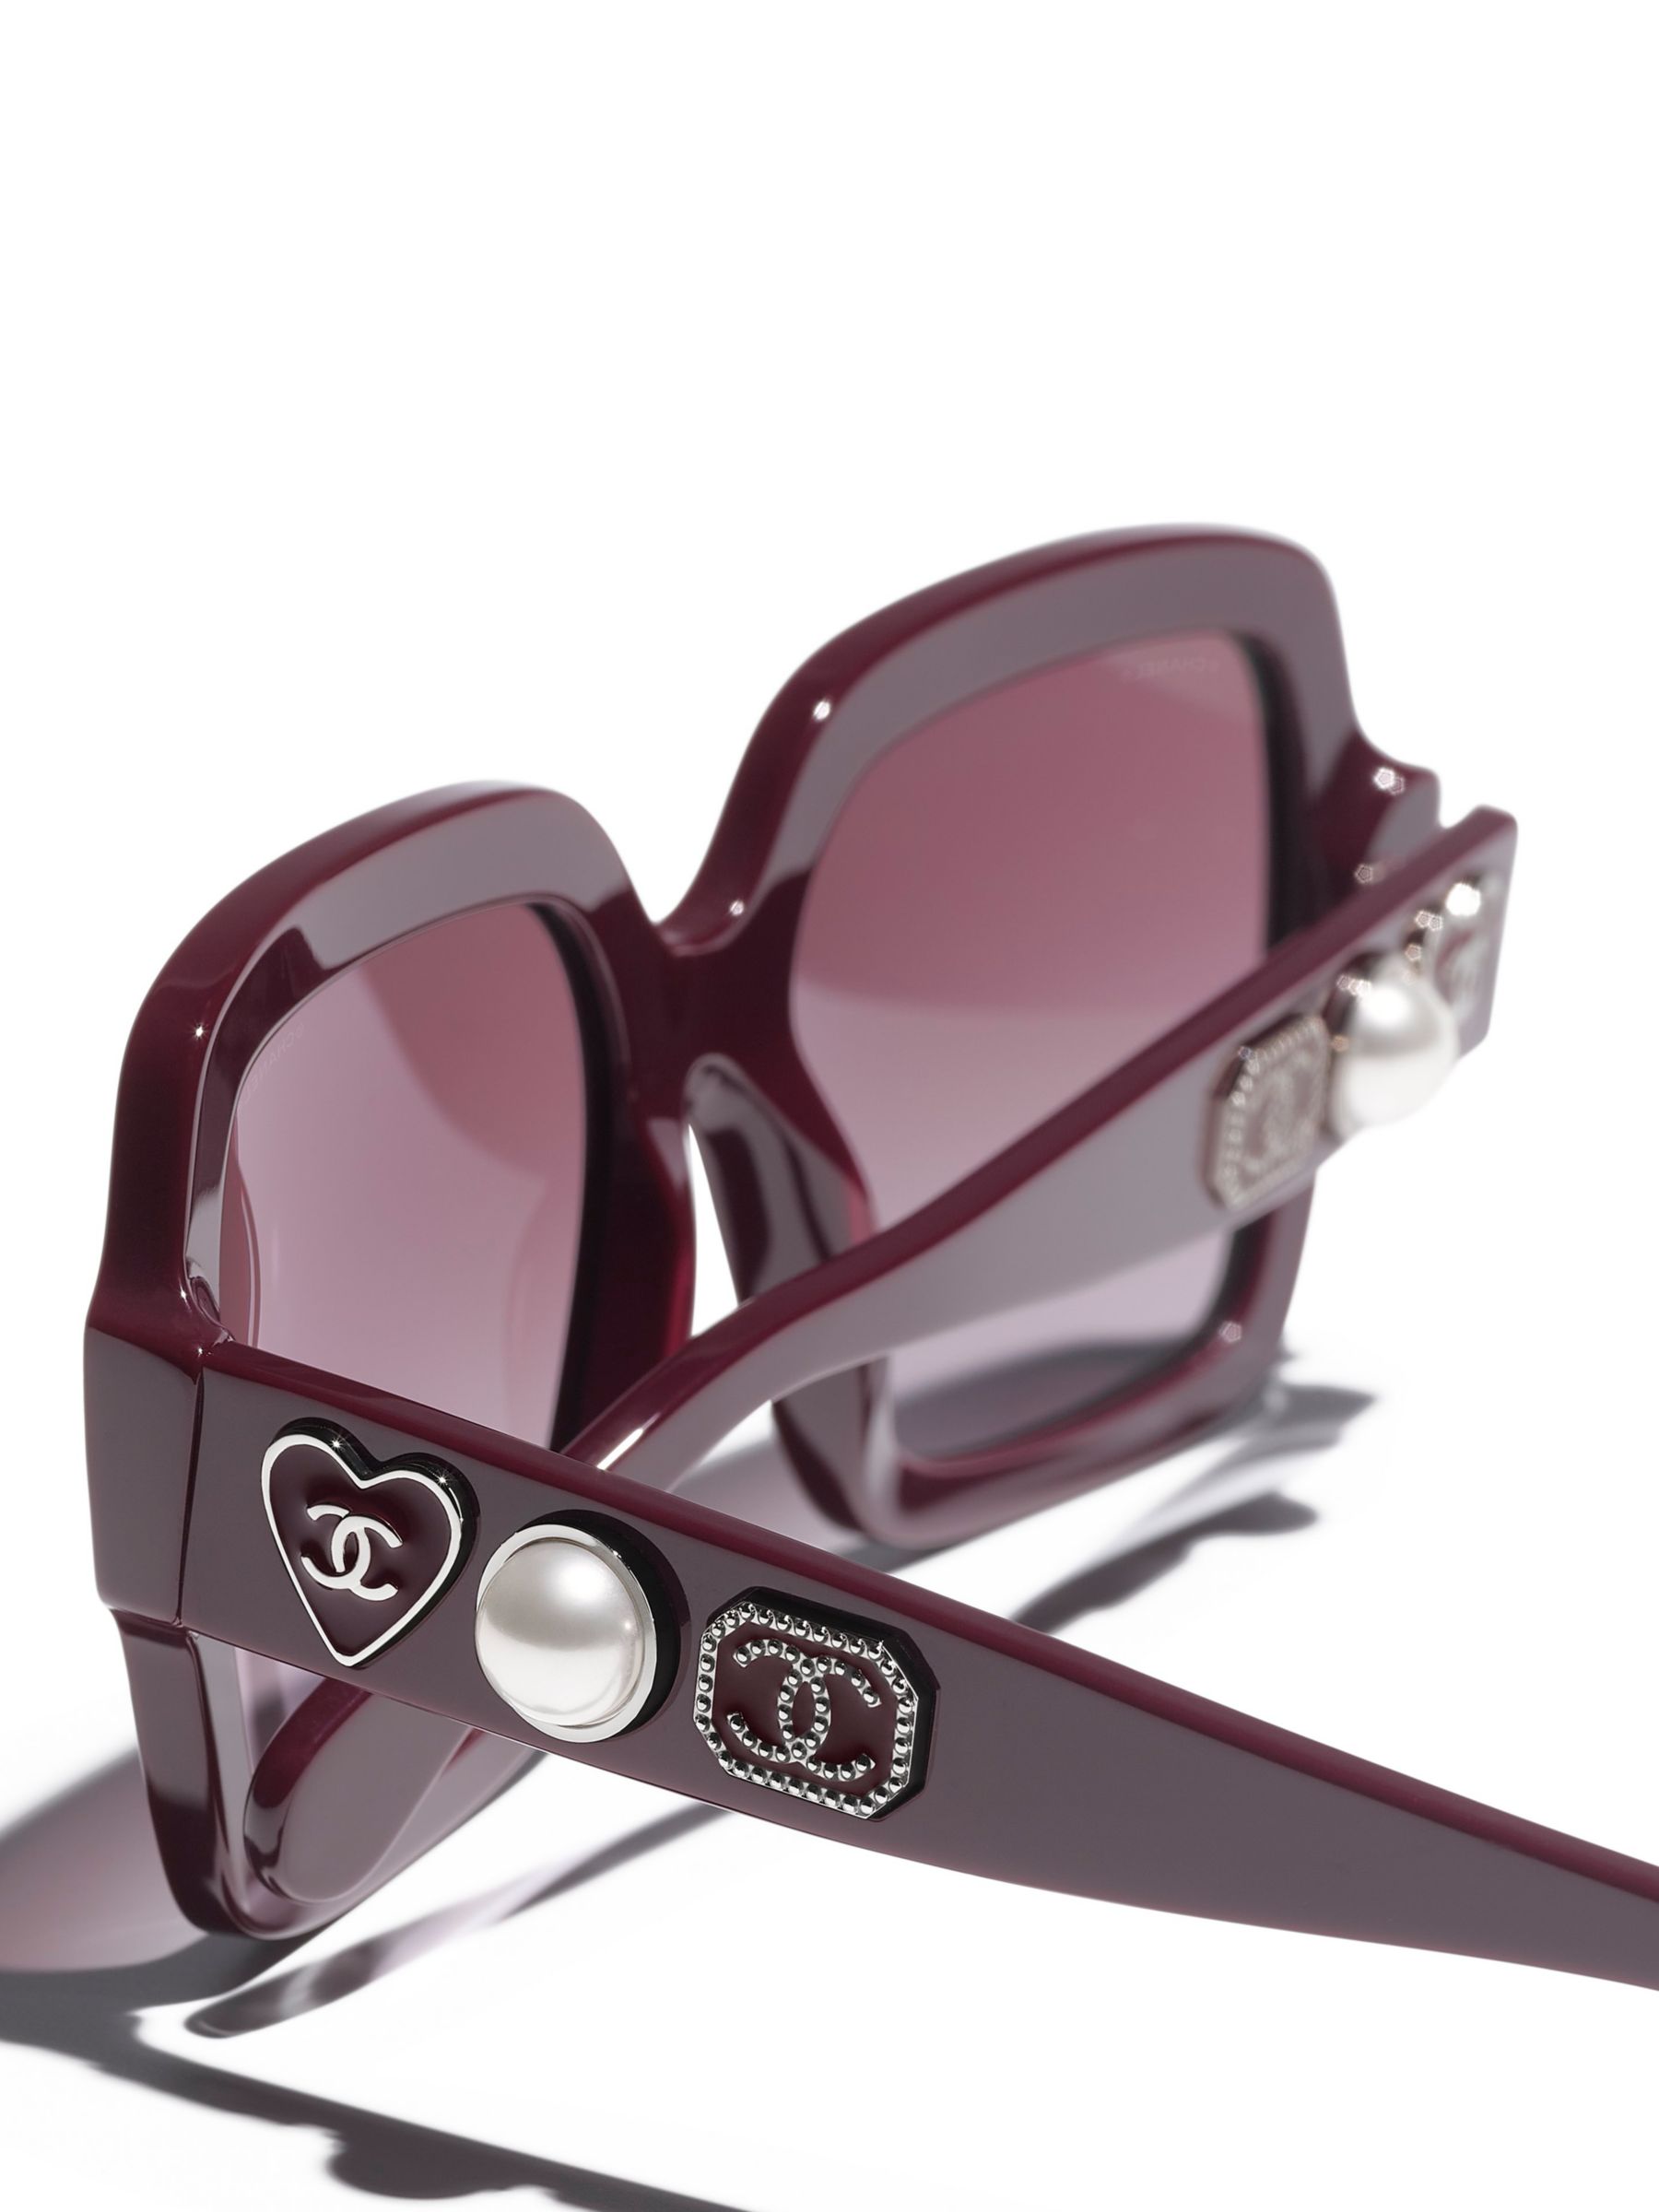 Shop CHANEL Heart Square Sunglasses by Renchic